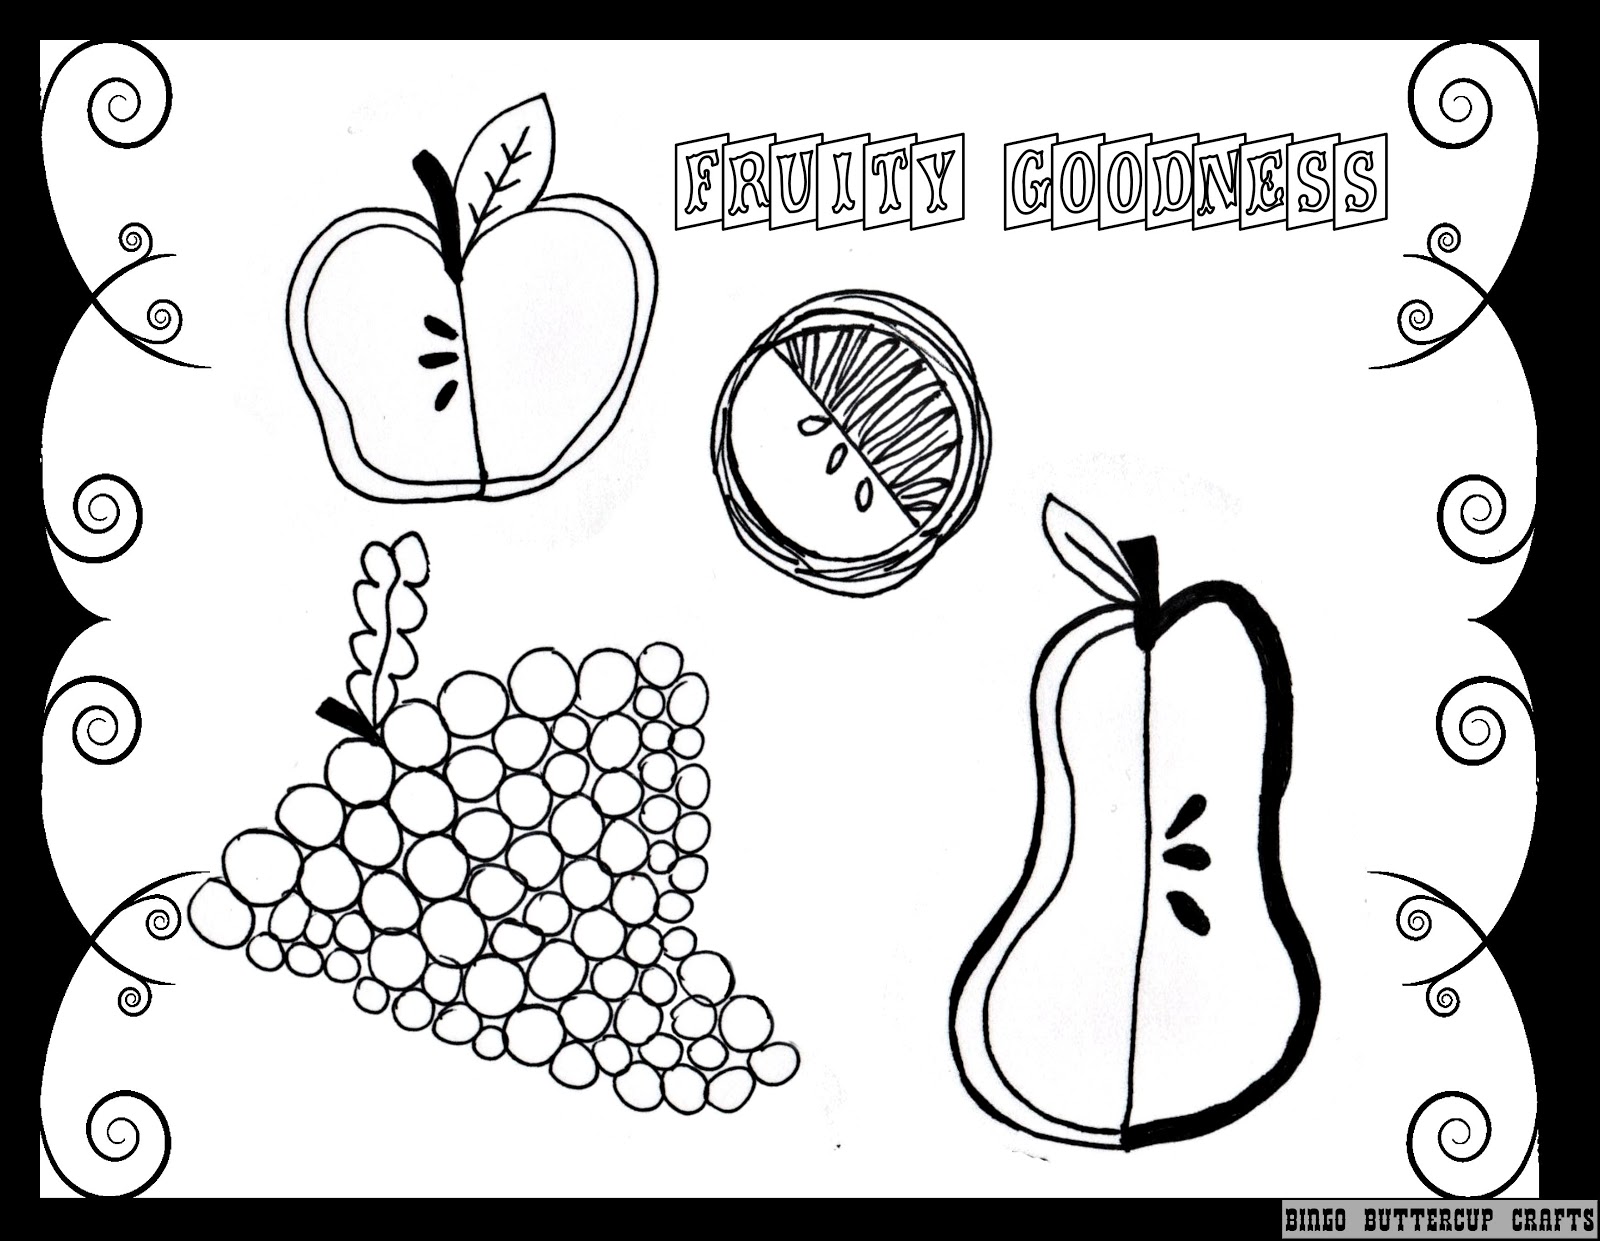 Download Kawaii Junk Food Coloring Pages Coloring Pages